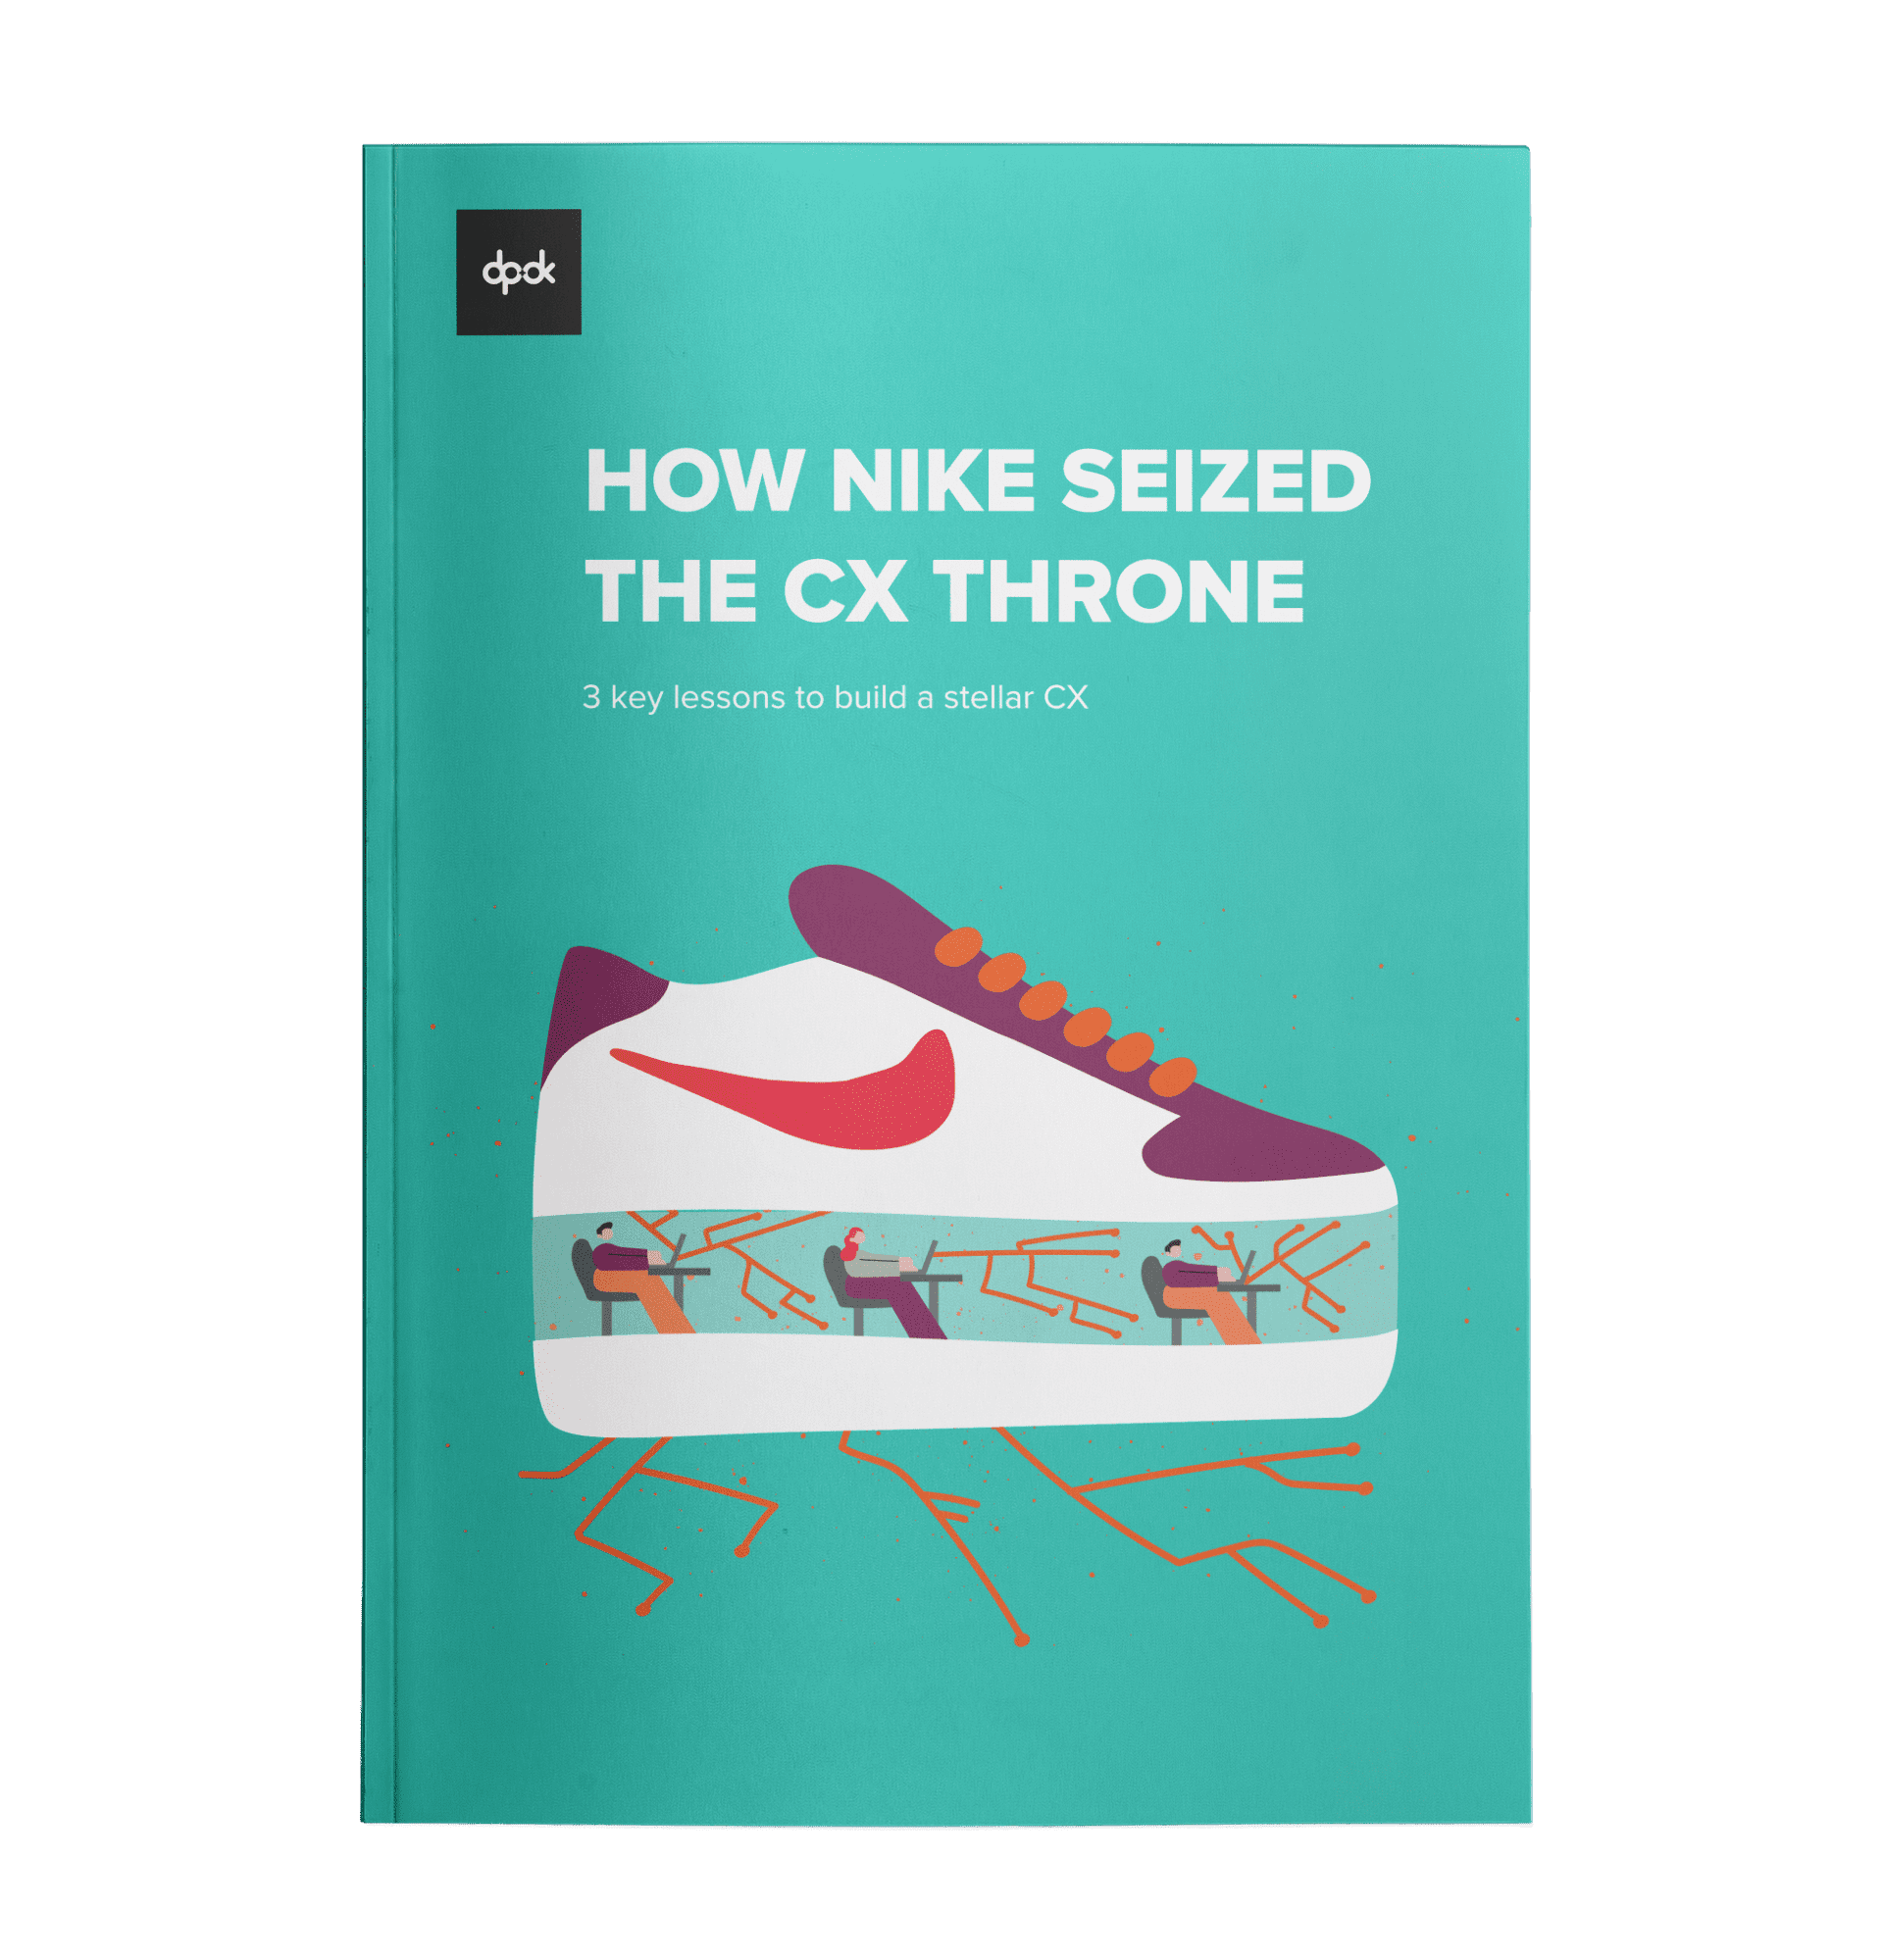 How Nike seized the CX throne